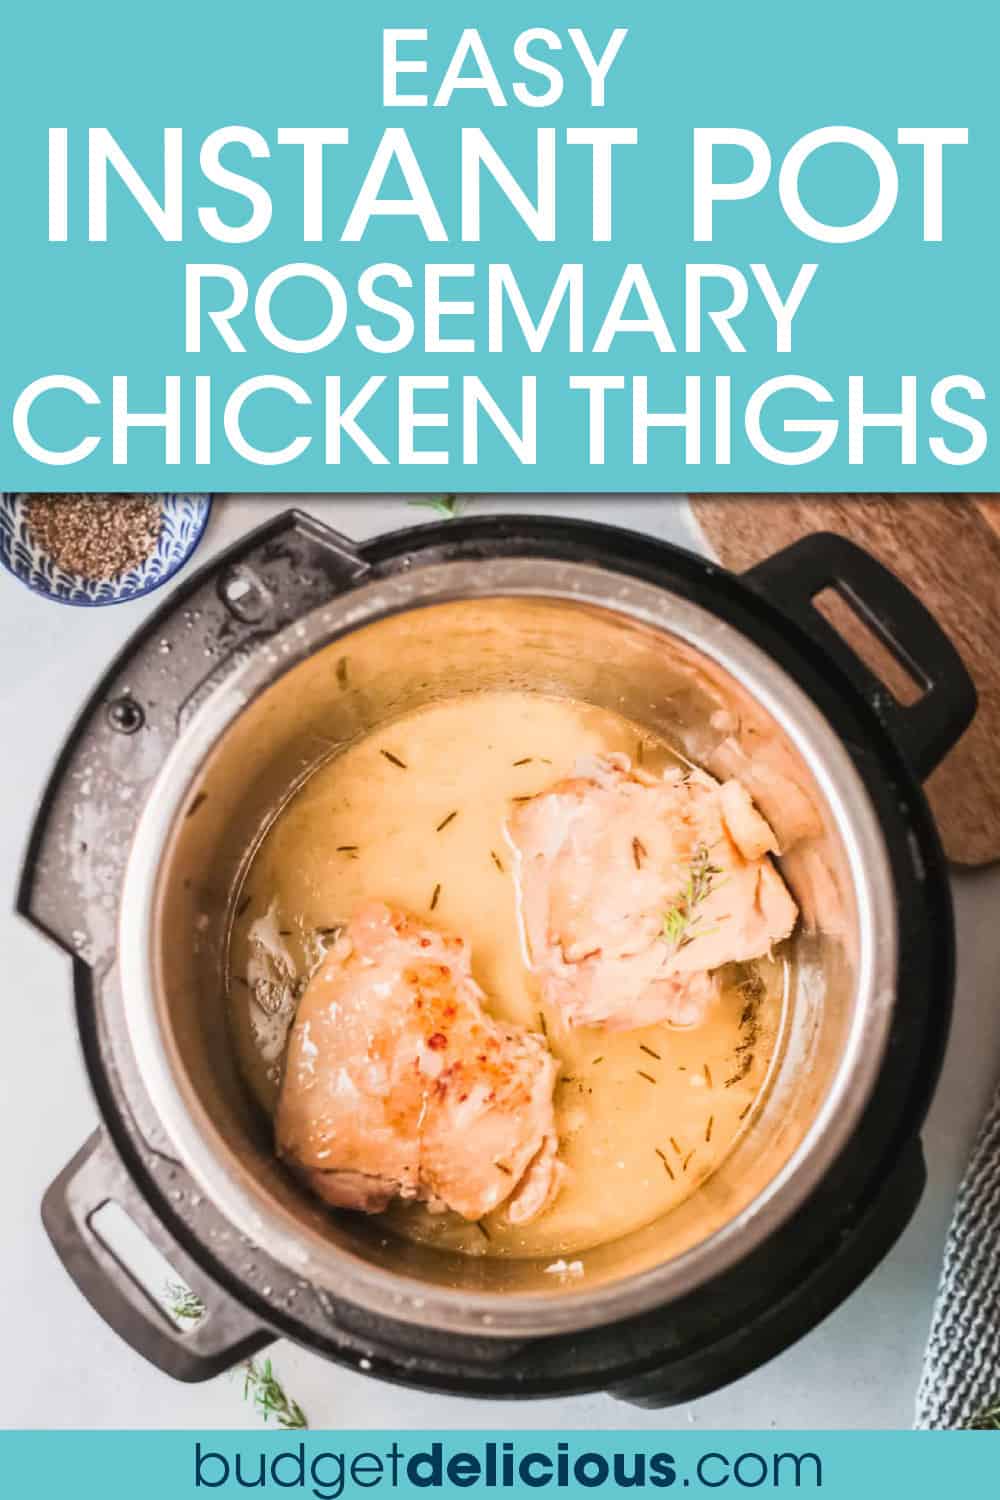 Easy Rosemary Instant Pot Chicken Thighs - Budget Delicious